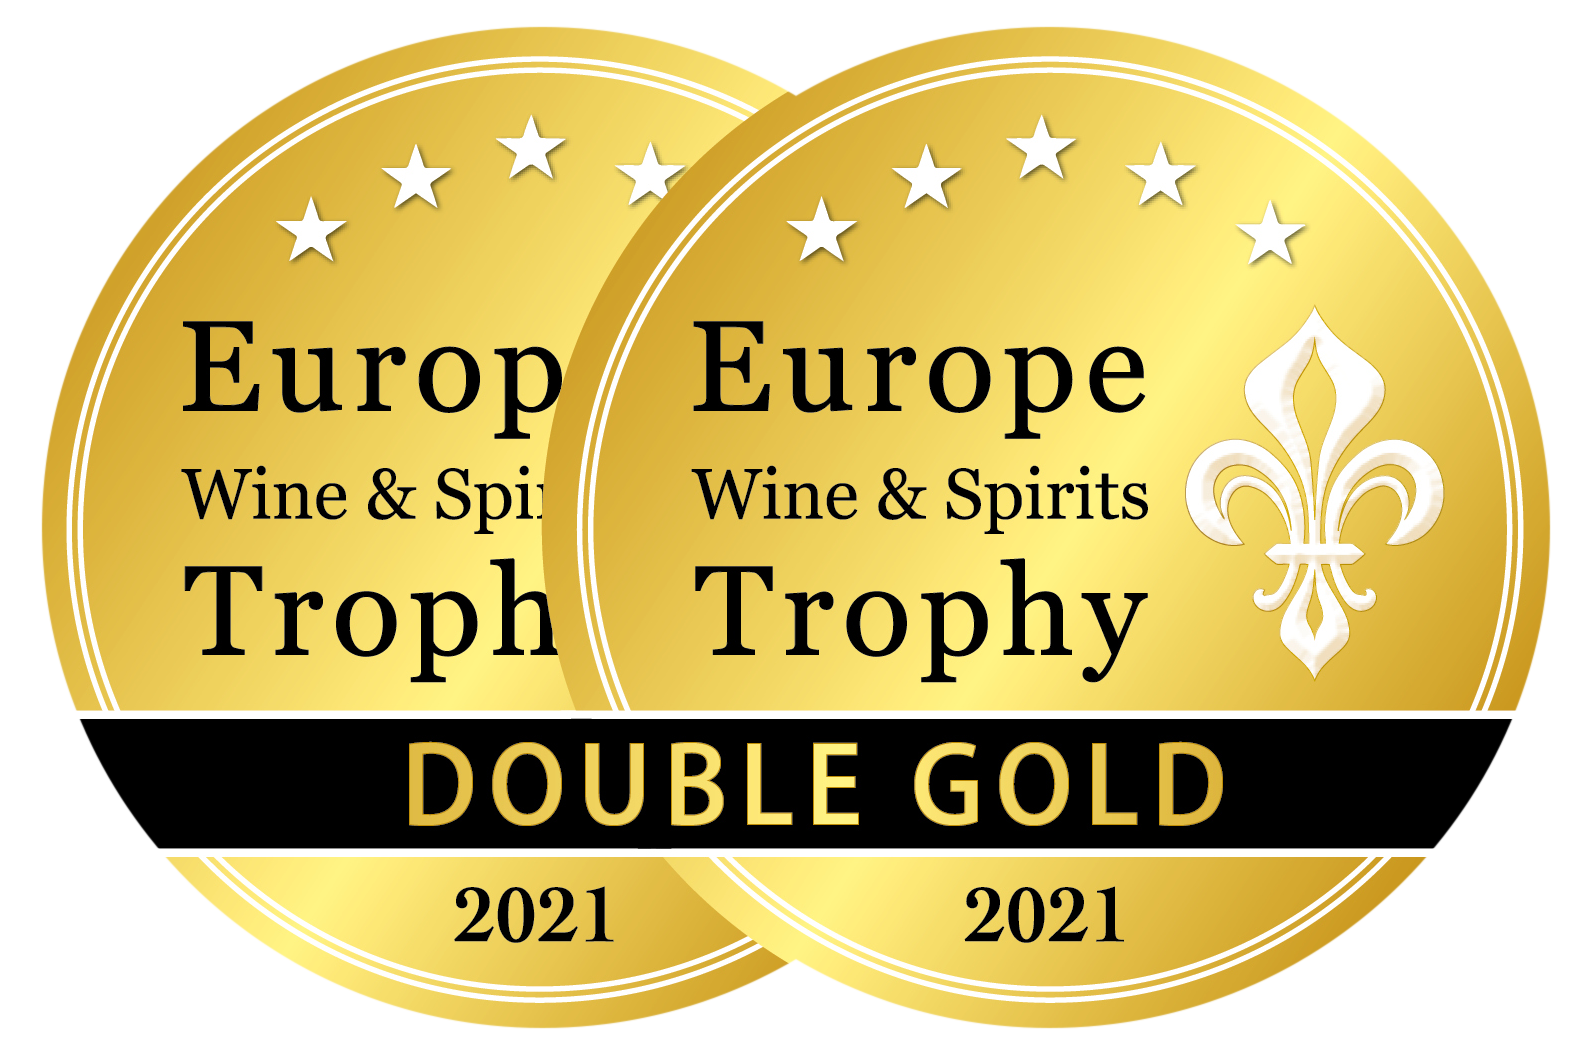 Europe Wine & Spirits Trophy Double Gold 2021 Badge